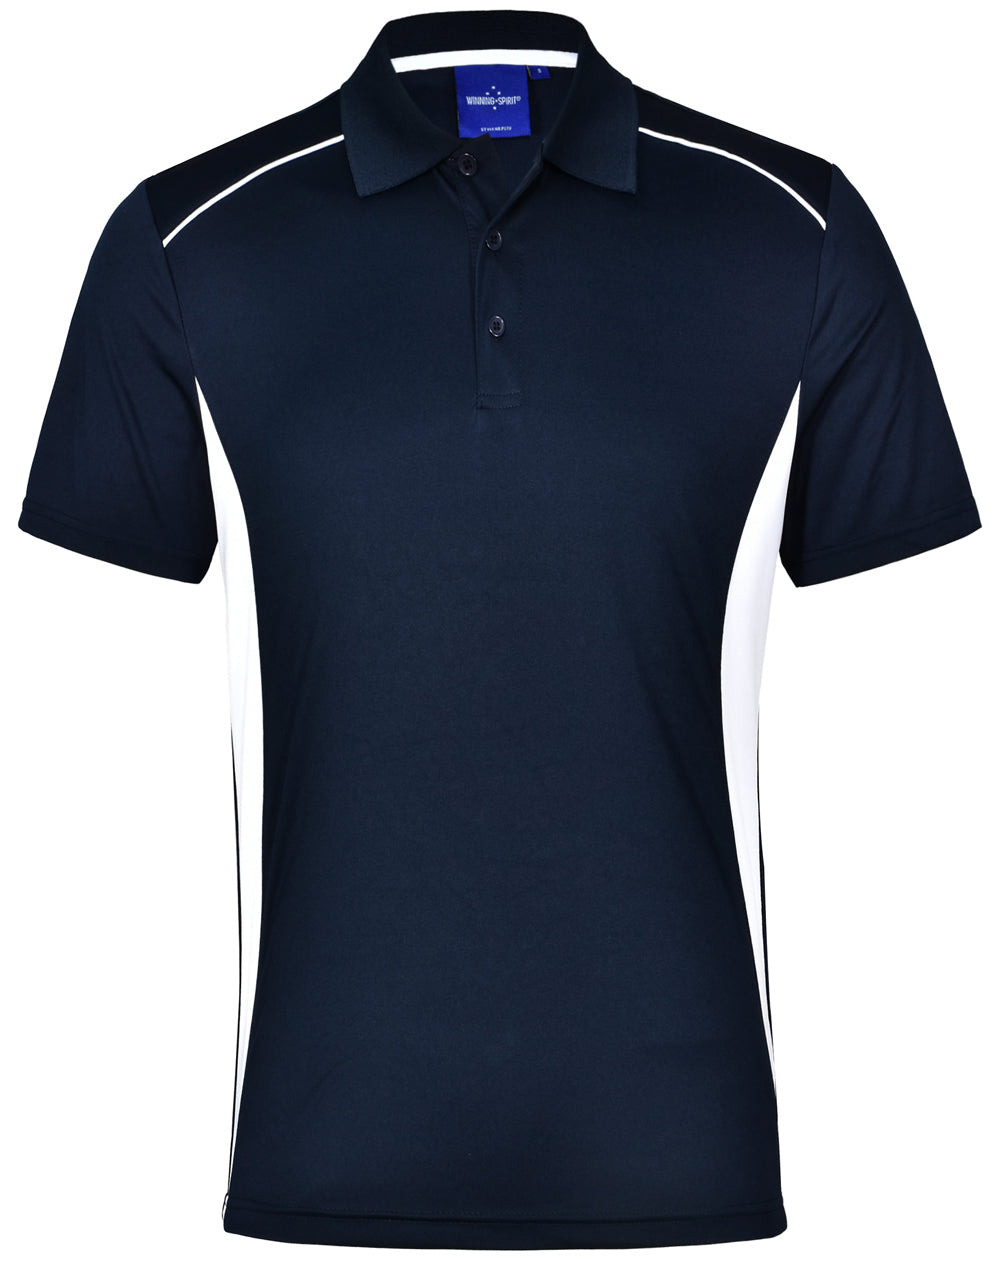 Pursuit Short Sleeve Mens Polo - made by AIW